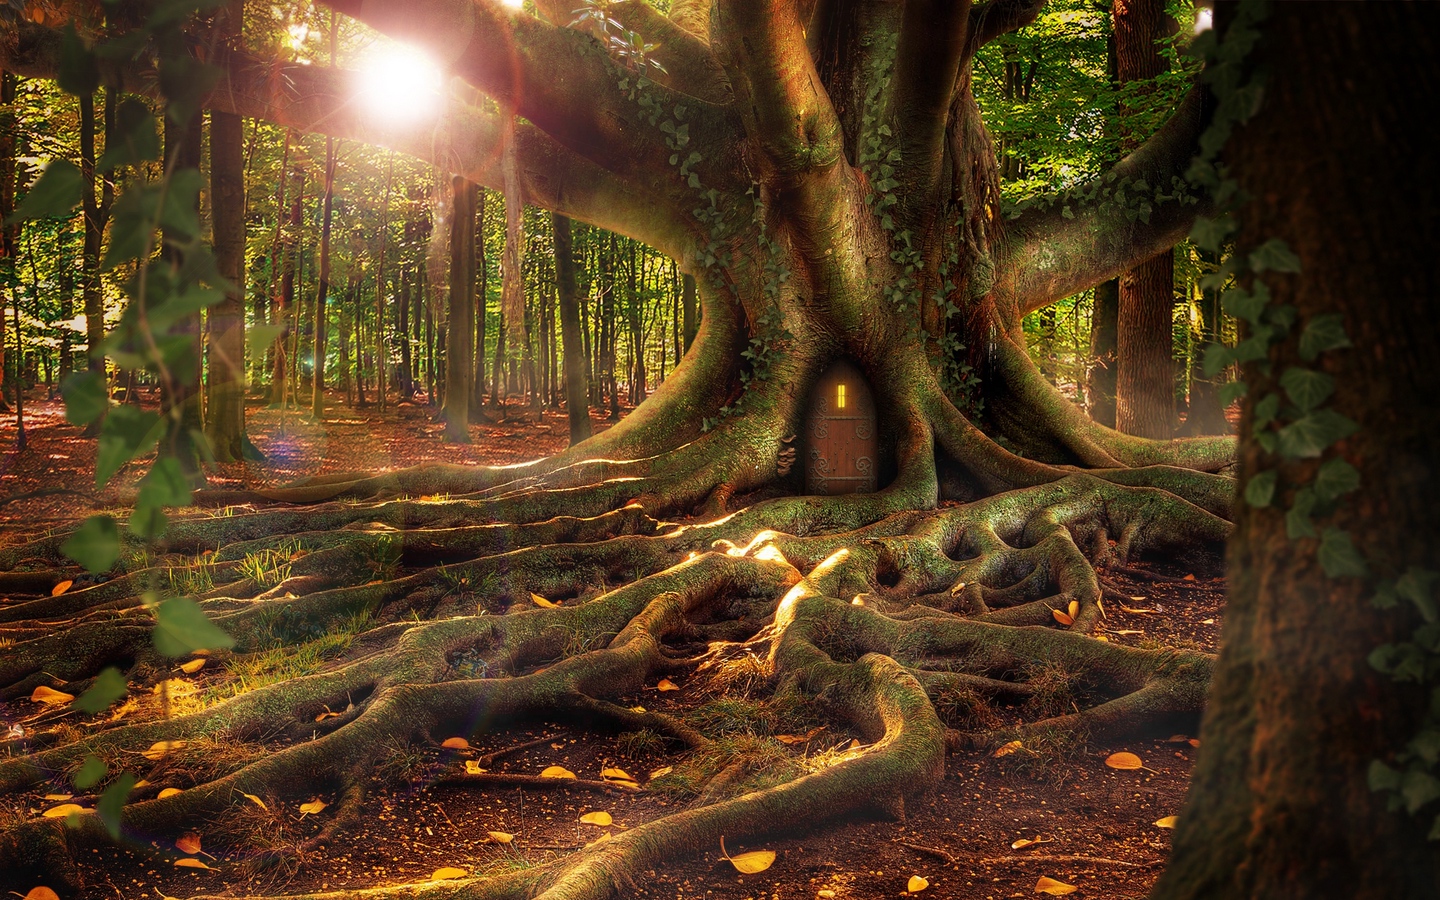 Nature Trees Branch Leaves Photoshop Roots Fallen Leaves Sun Door Forest Treehouse Moss 1440x900